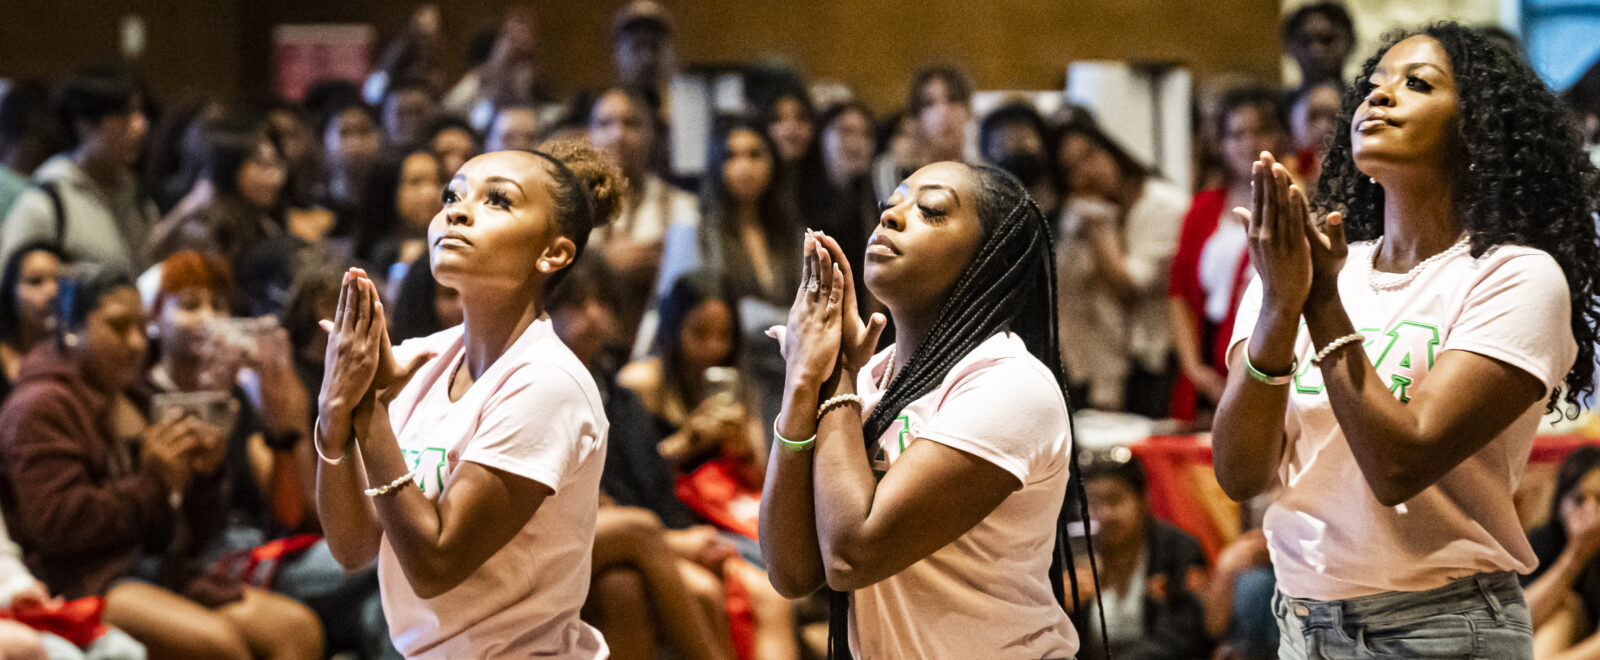 Black women wearing pink Alpha Kappa Alpha Sorority shirts perform a stroll in front of an audience.